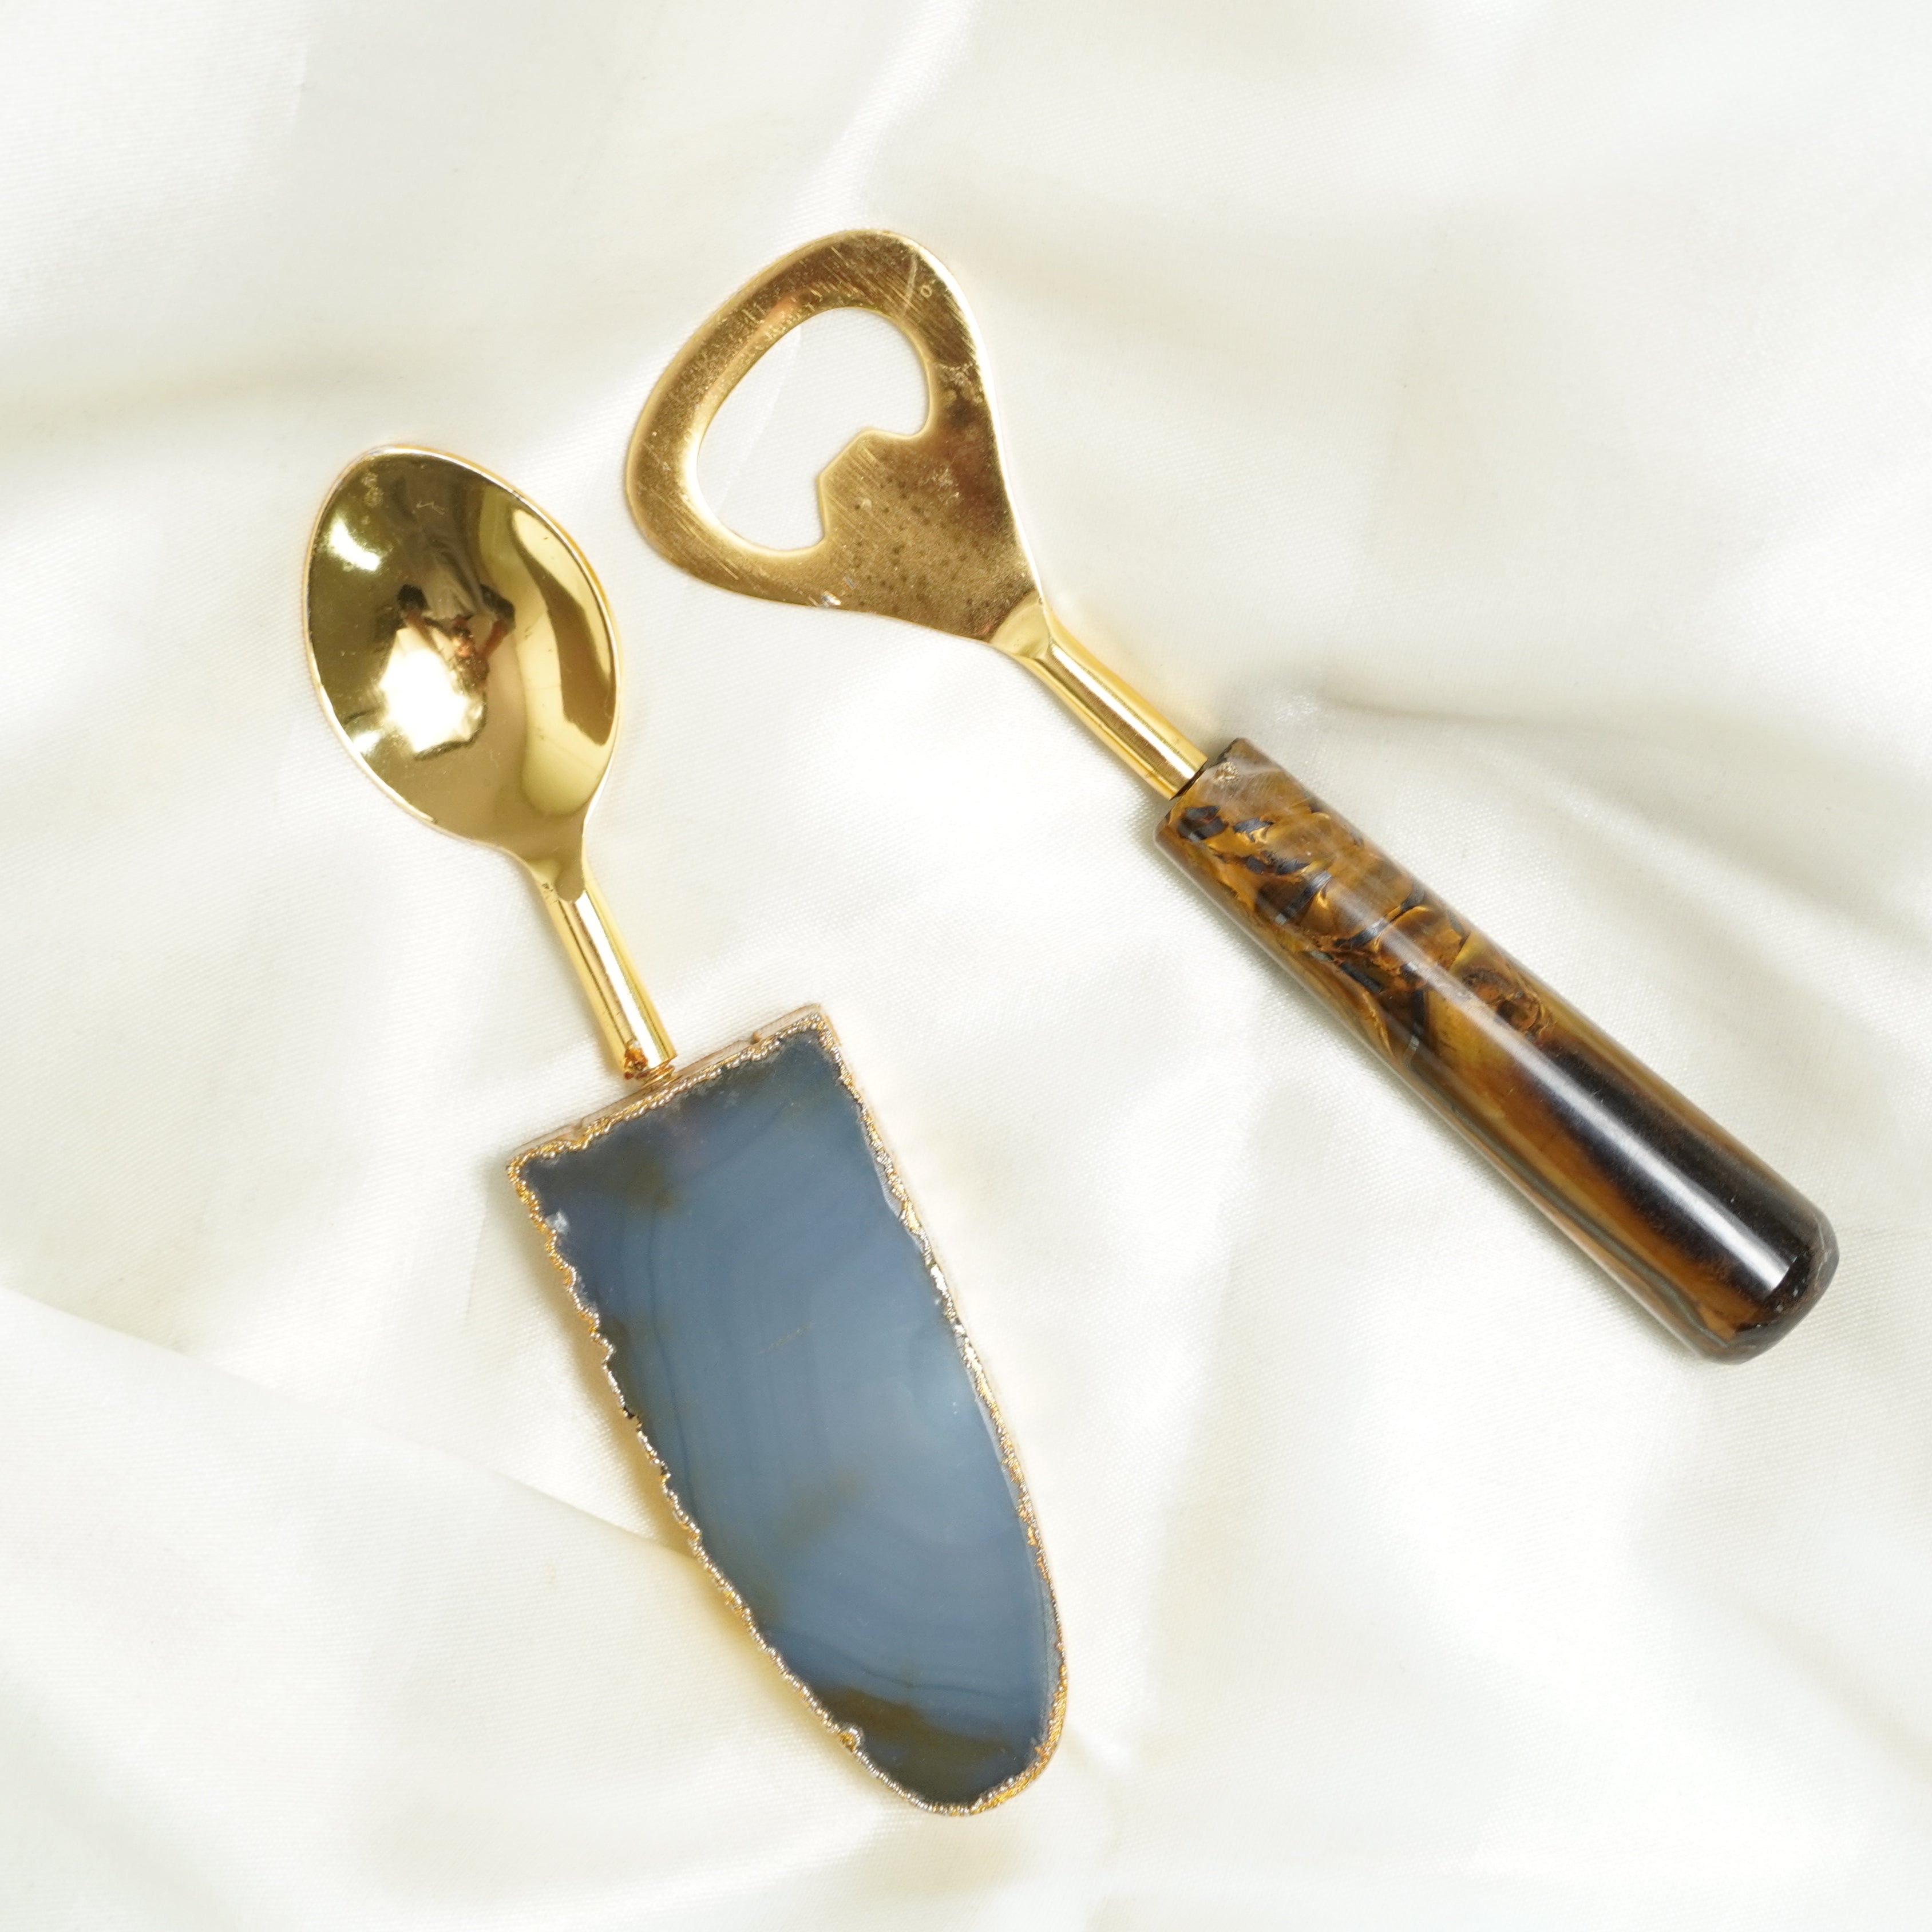 BIBELOT Handicrafts Agate Gold Salad Serving Spoon and Bottle Opener combo set (Gold Platted Edges and Stainless Steel)